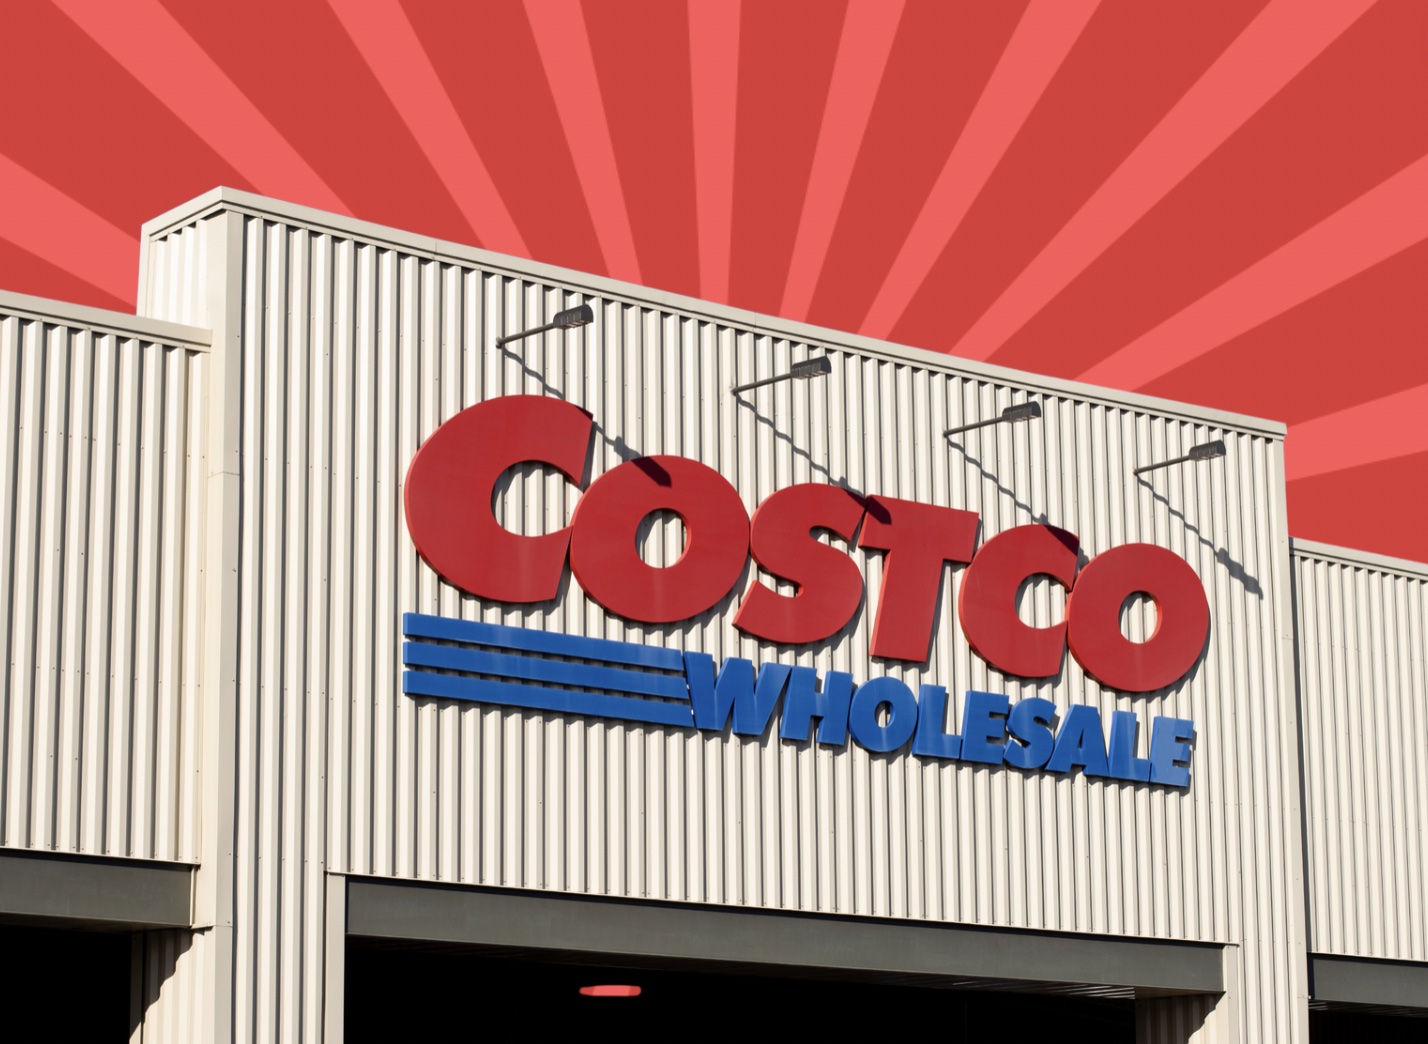 Bakers Say Costco Kirkland Butter Changed Dramatically